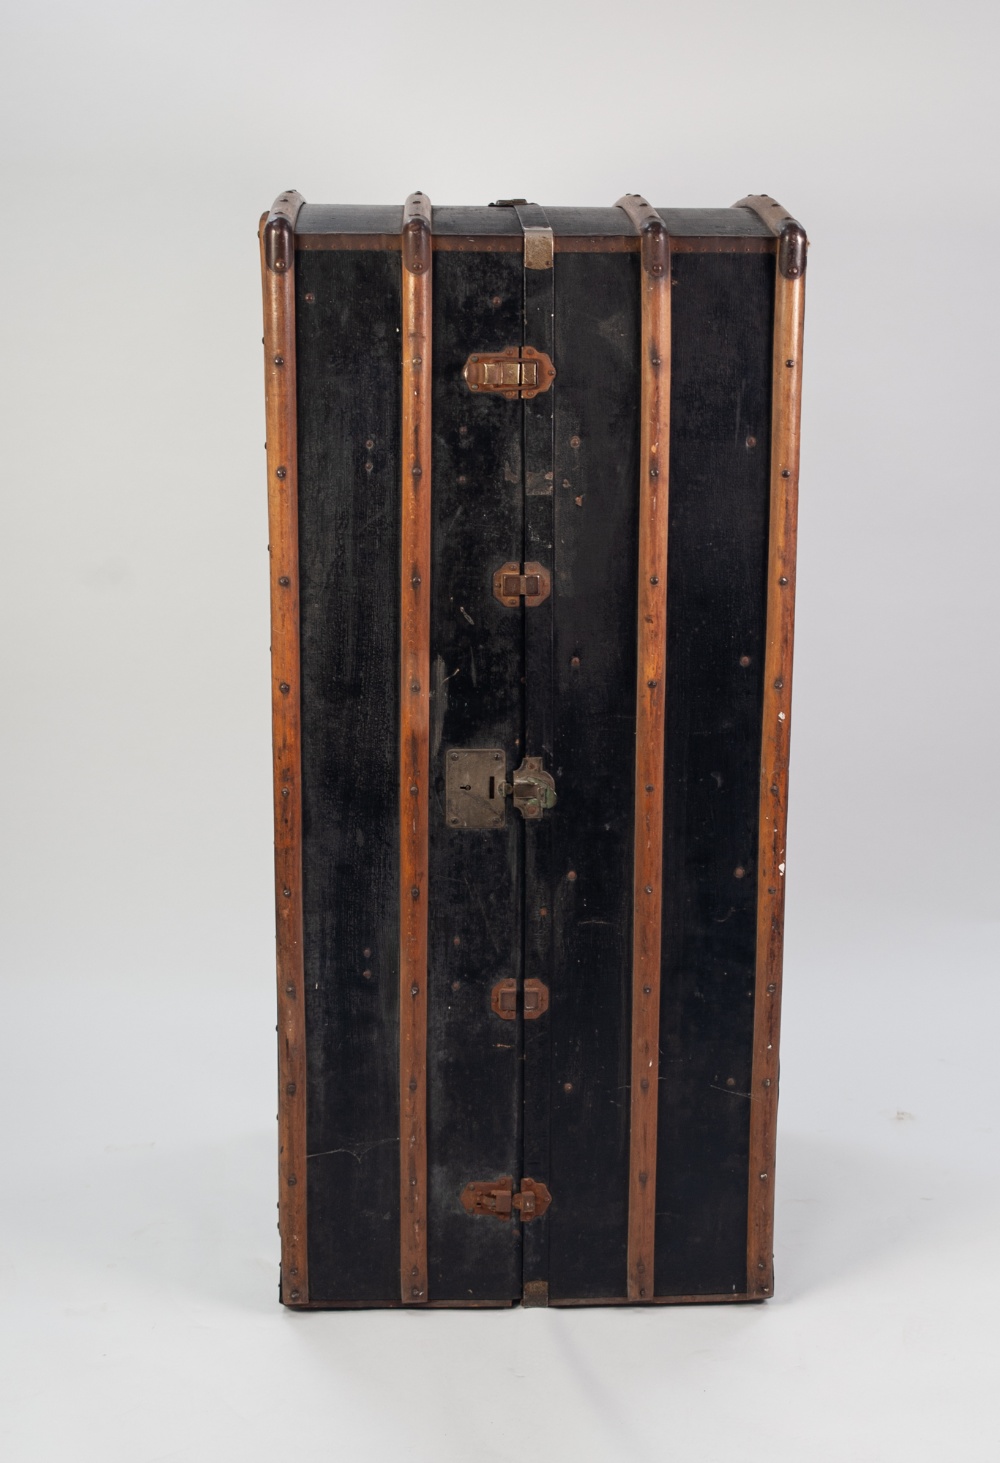 AN EARLY 1900's METAL BOUND, WOODEN RIBBED AND BLACK LEATHERETTE COVERED DELUXE CABIN TRUNK, the - Image 2 of 2